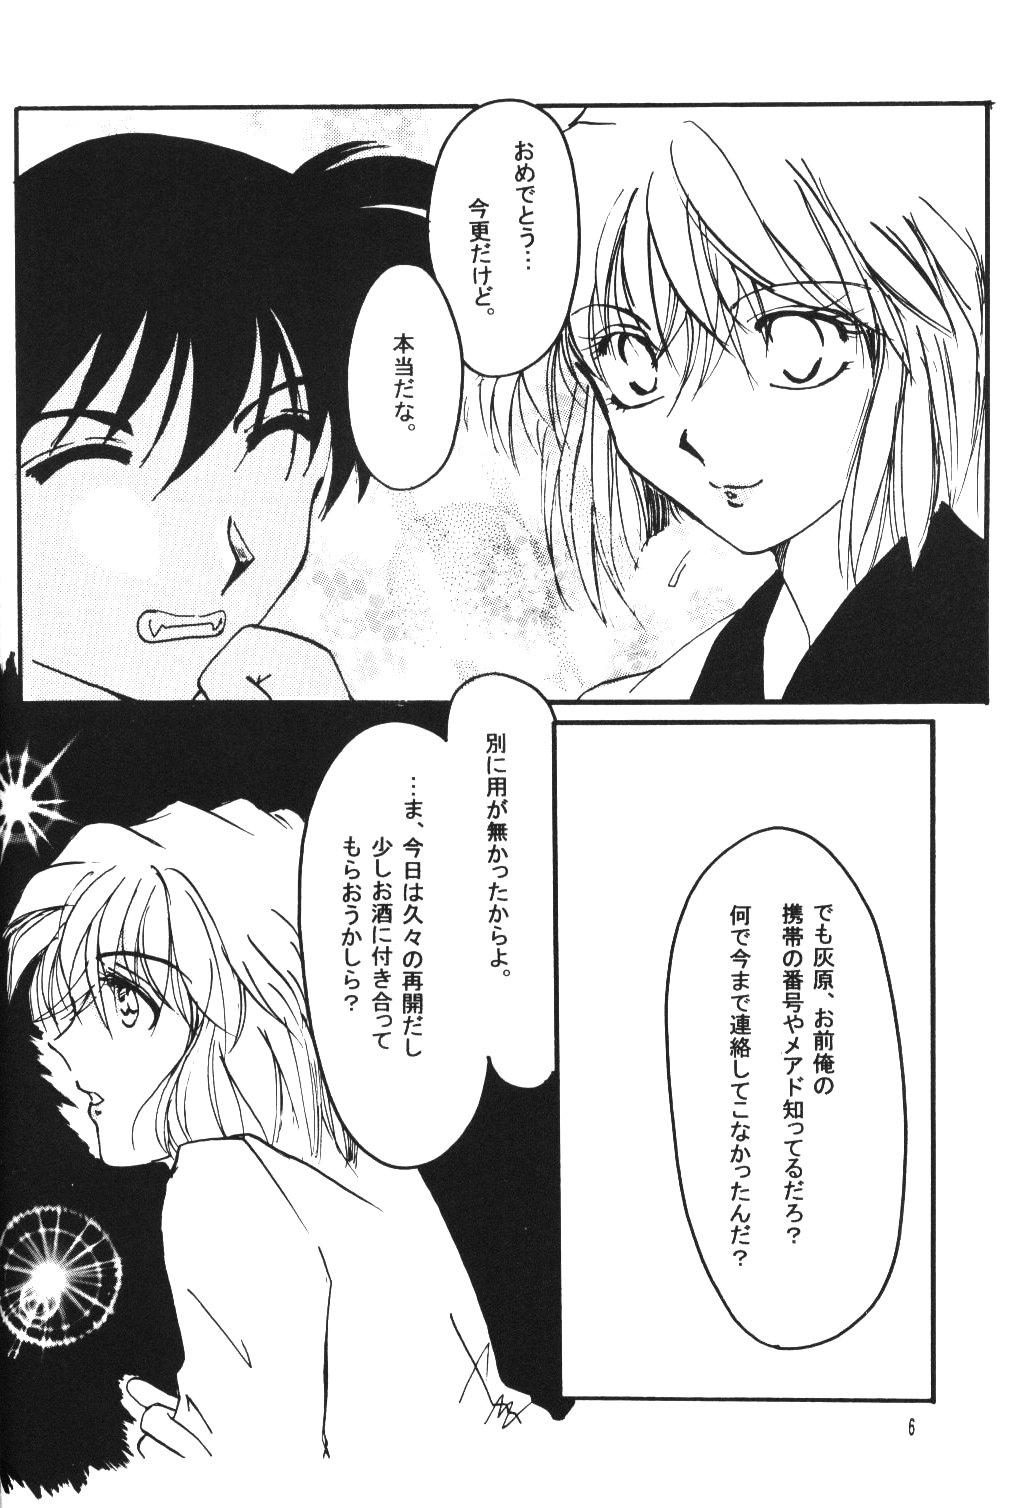 All Over Drive - Detective conan Deflowered - Page 5